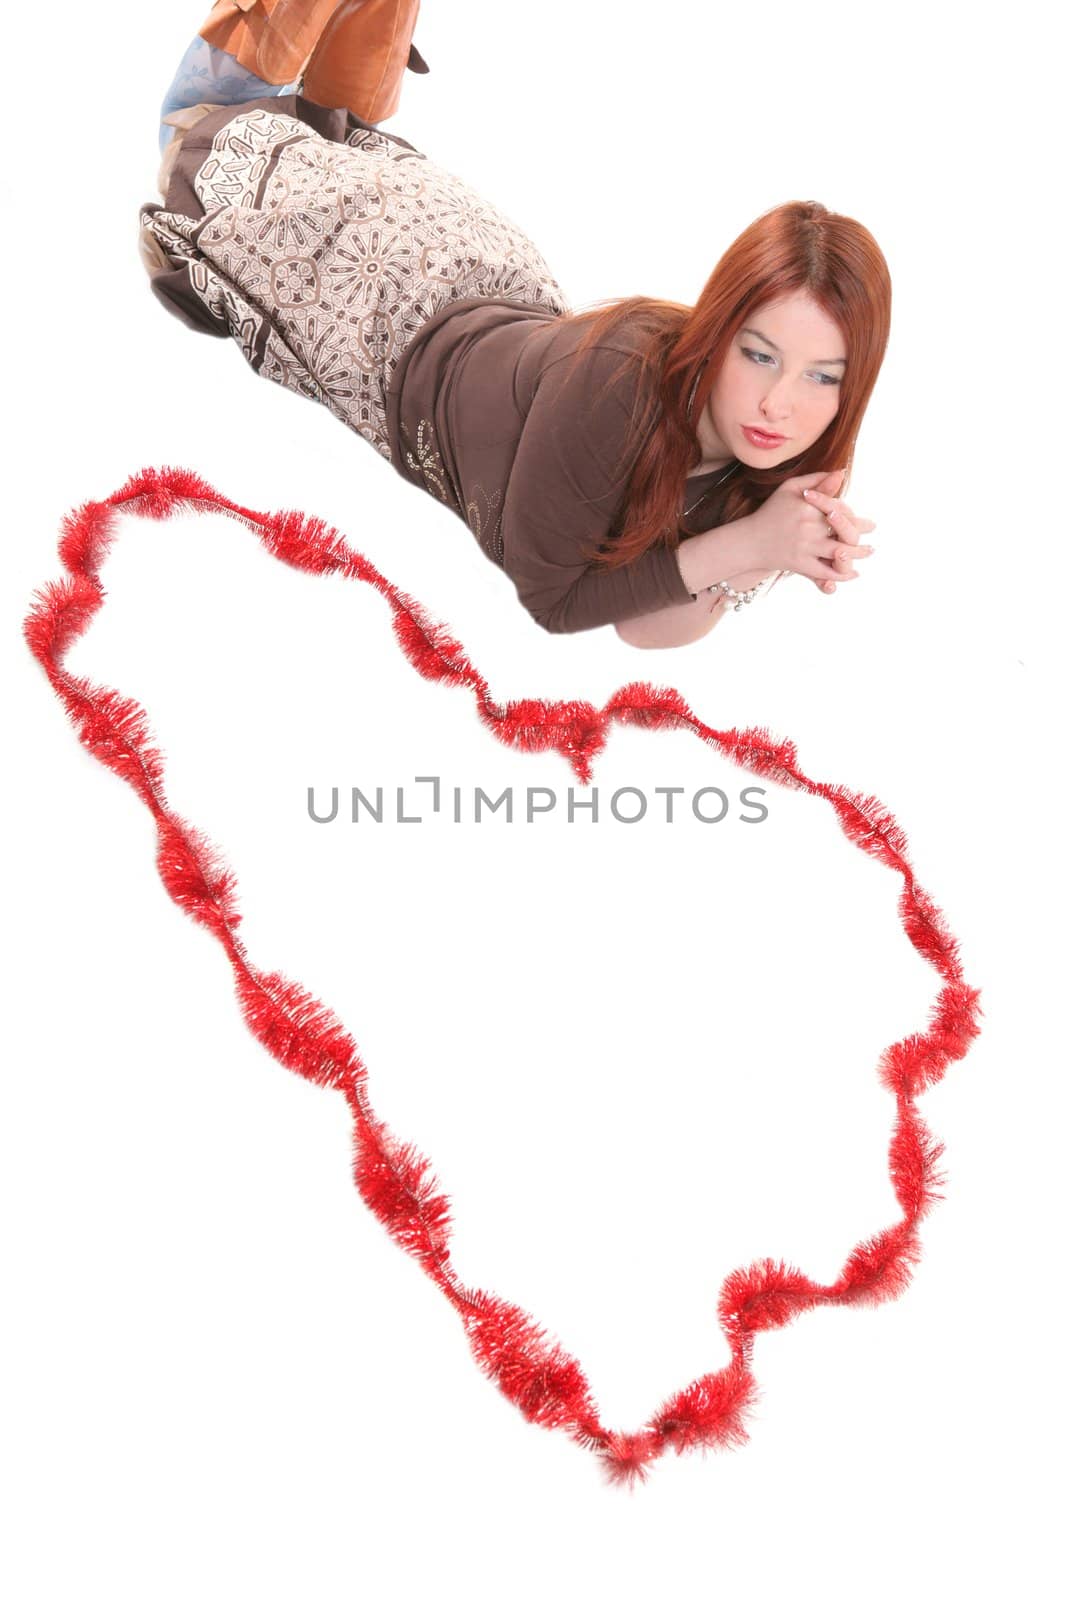 girl dreaming about love, on white background, with copy-space